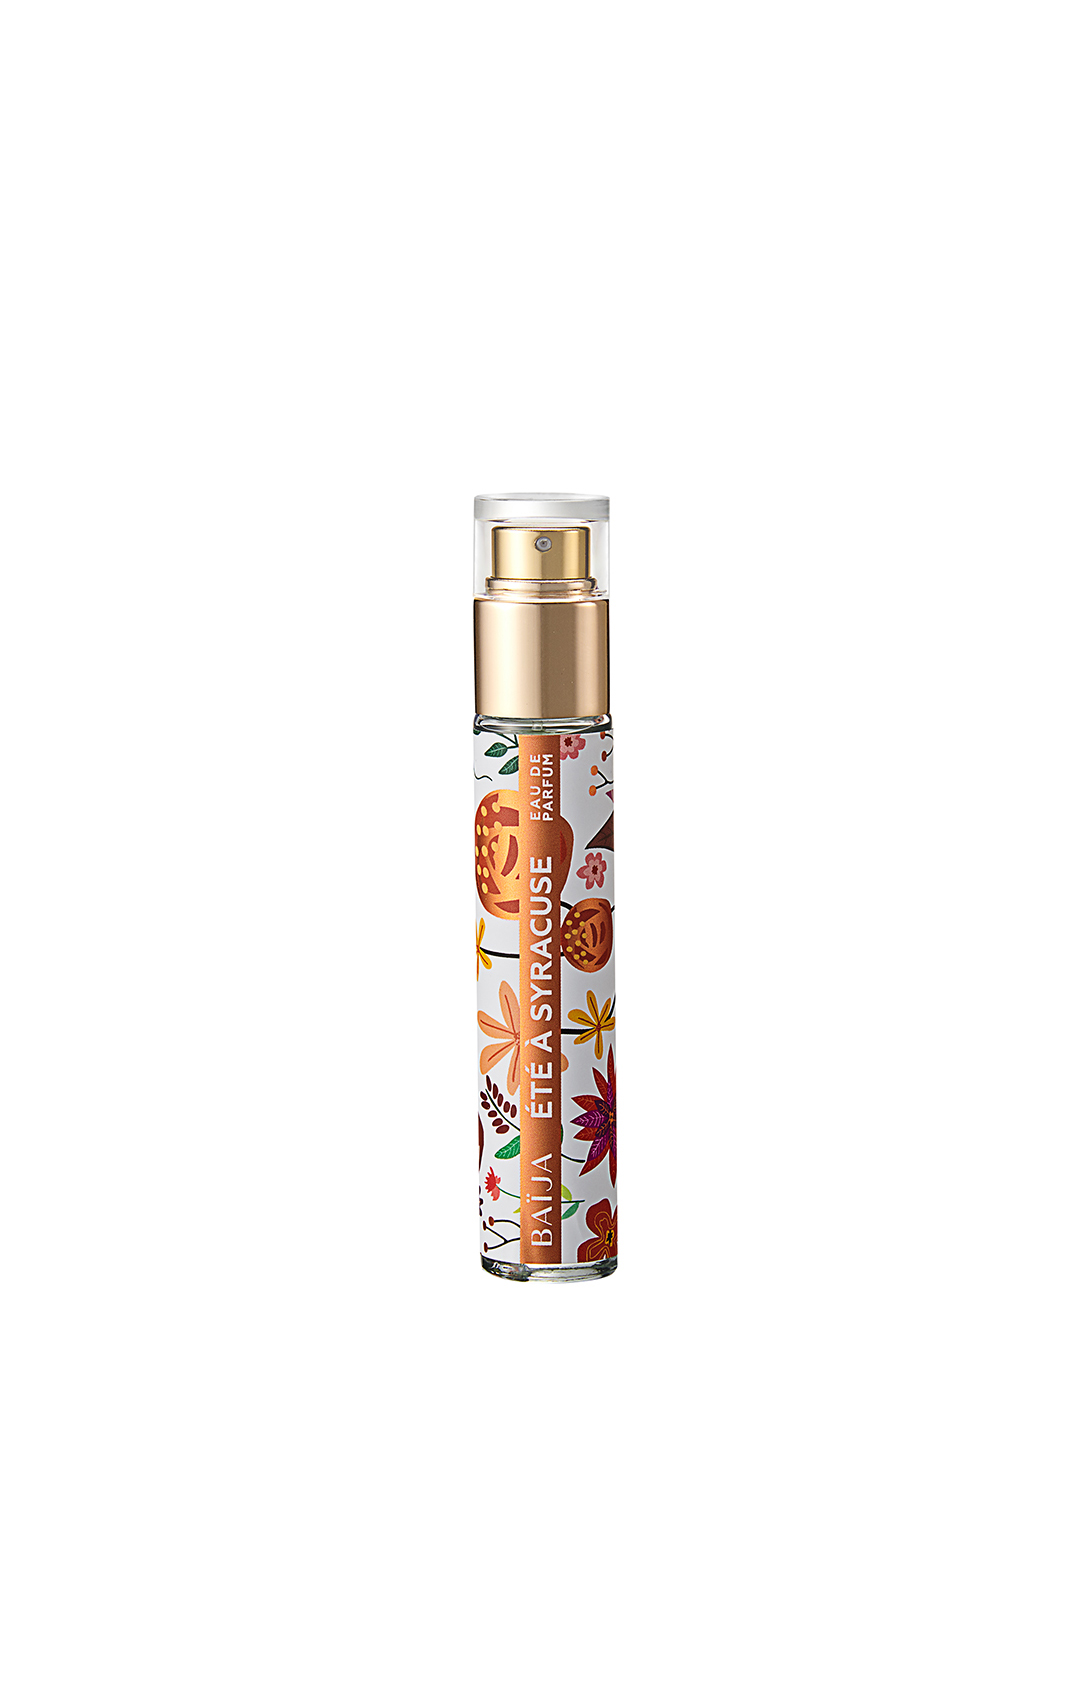 Product Image 24